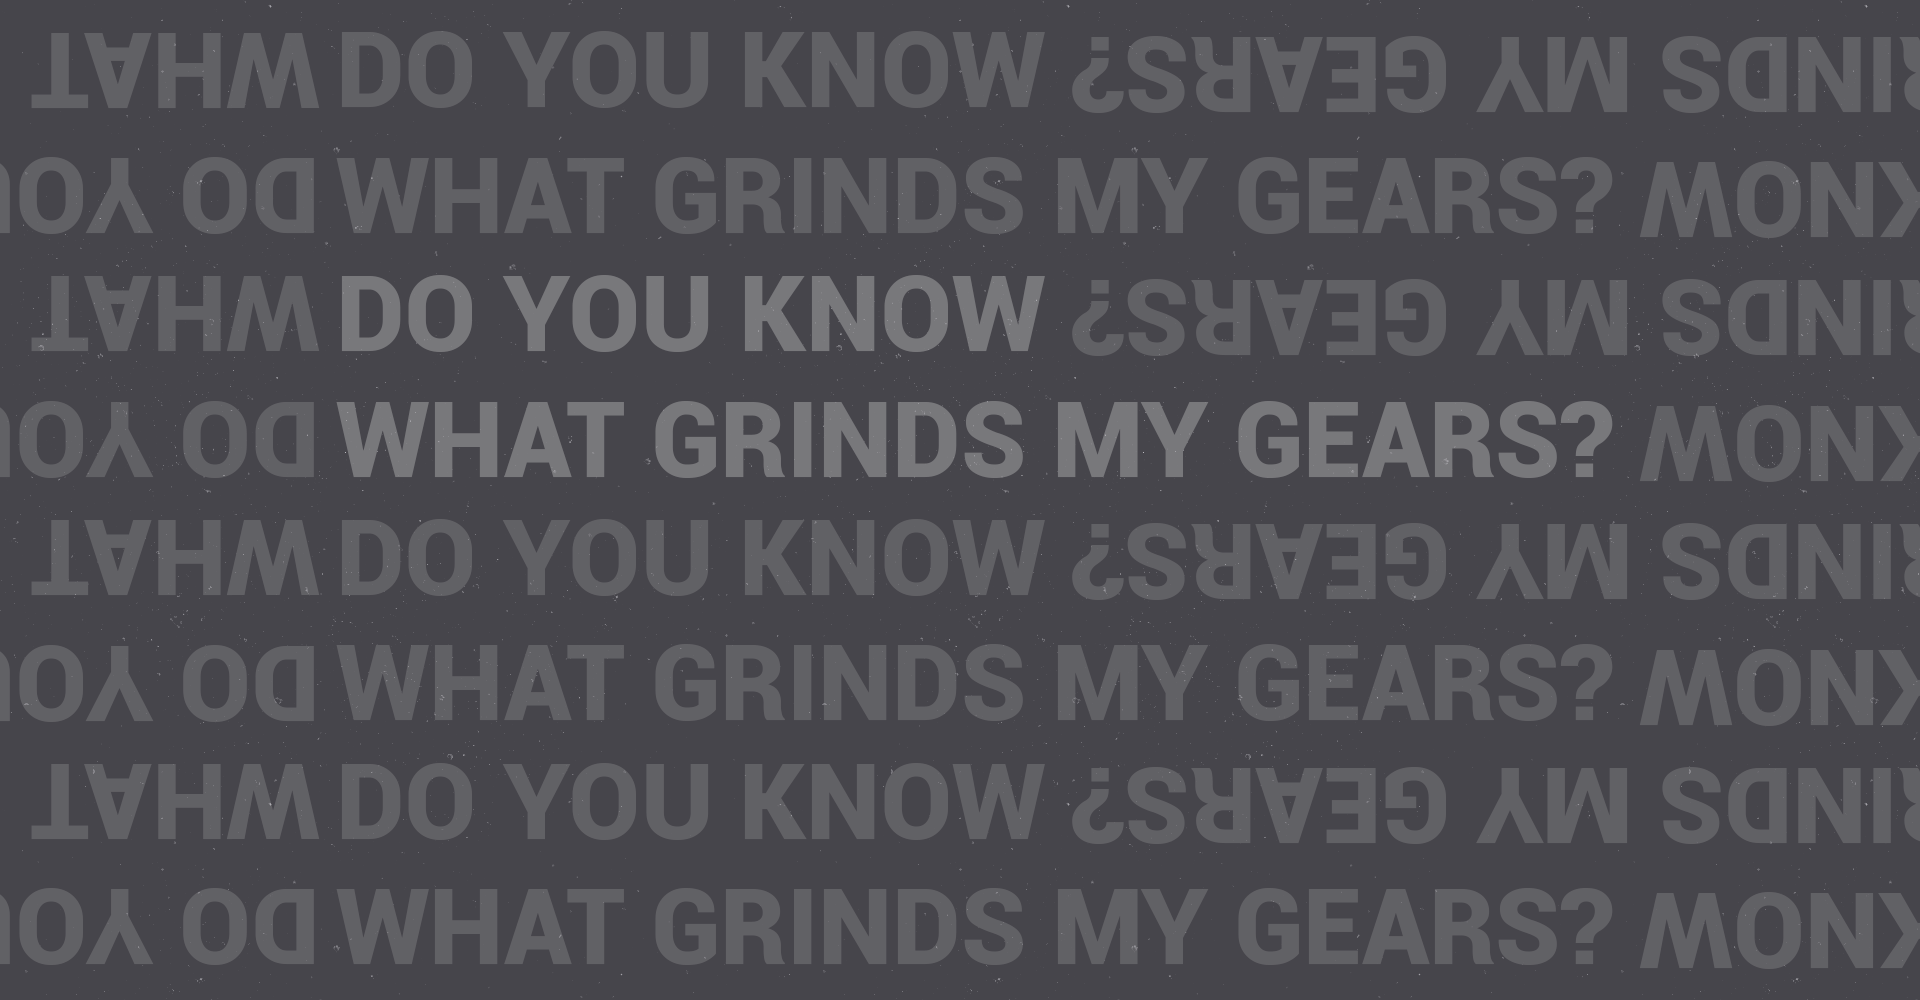 Do you know what grinds my gears? – Part 1